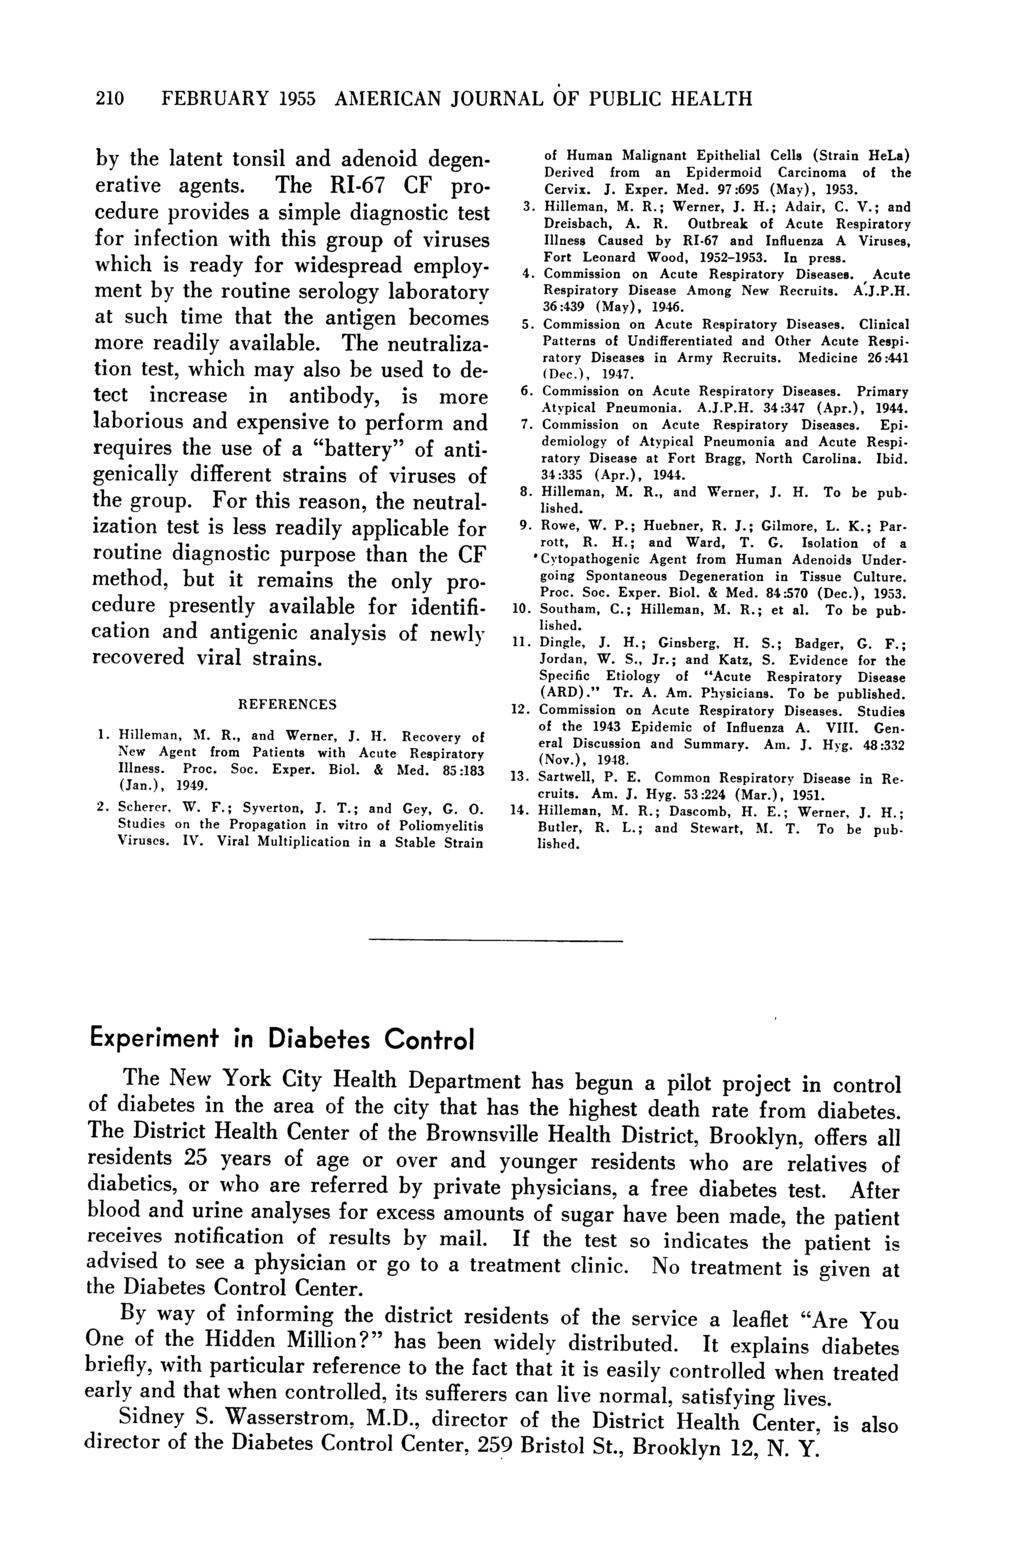 210 FEBRUARY 1955 AMIERICAN JOURNAL 6F PUBLIC HEALTH by the latent tonsil and adenoid degenerative agents.